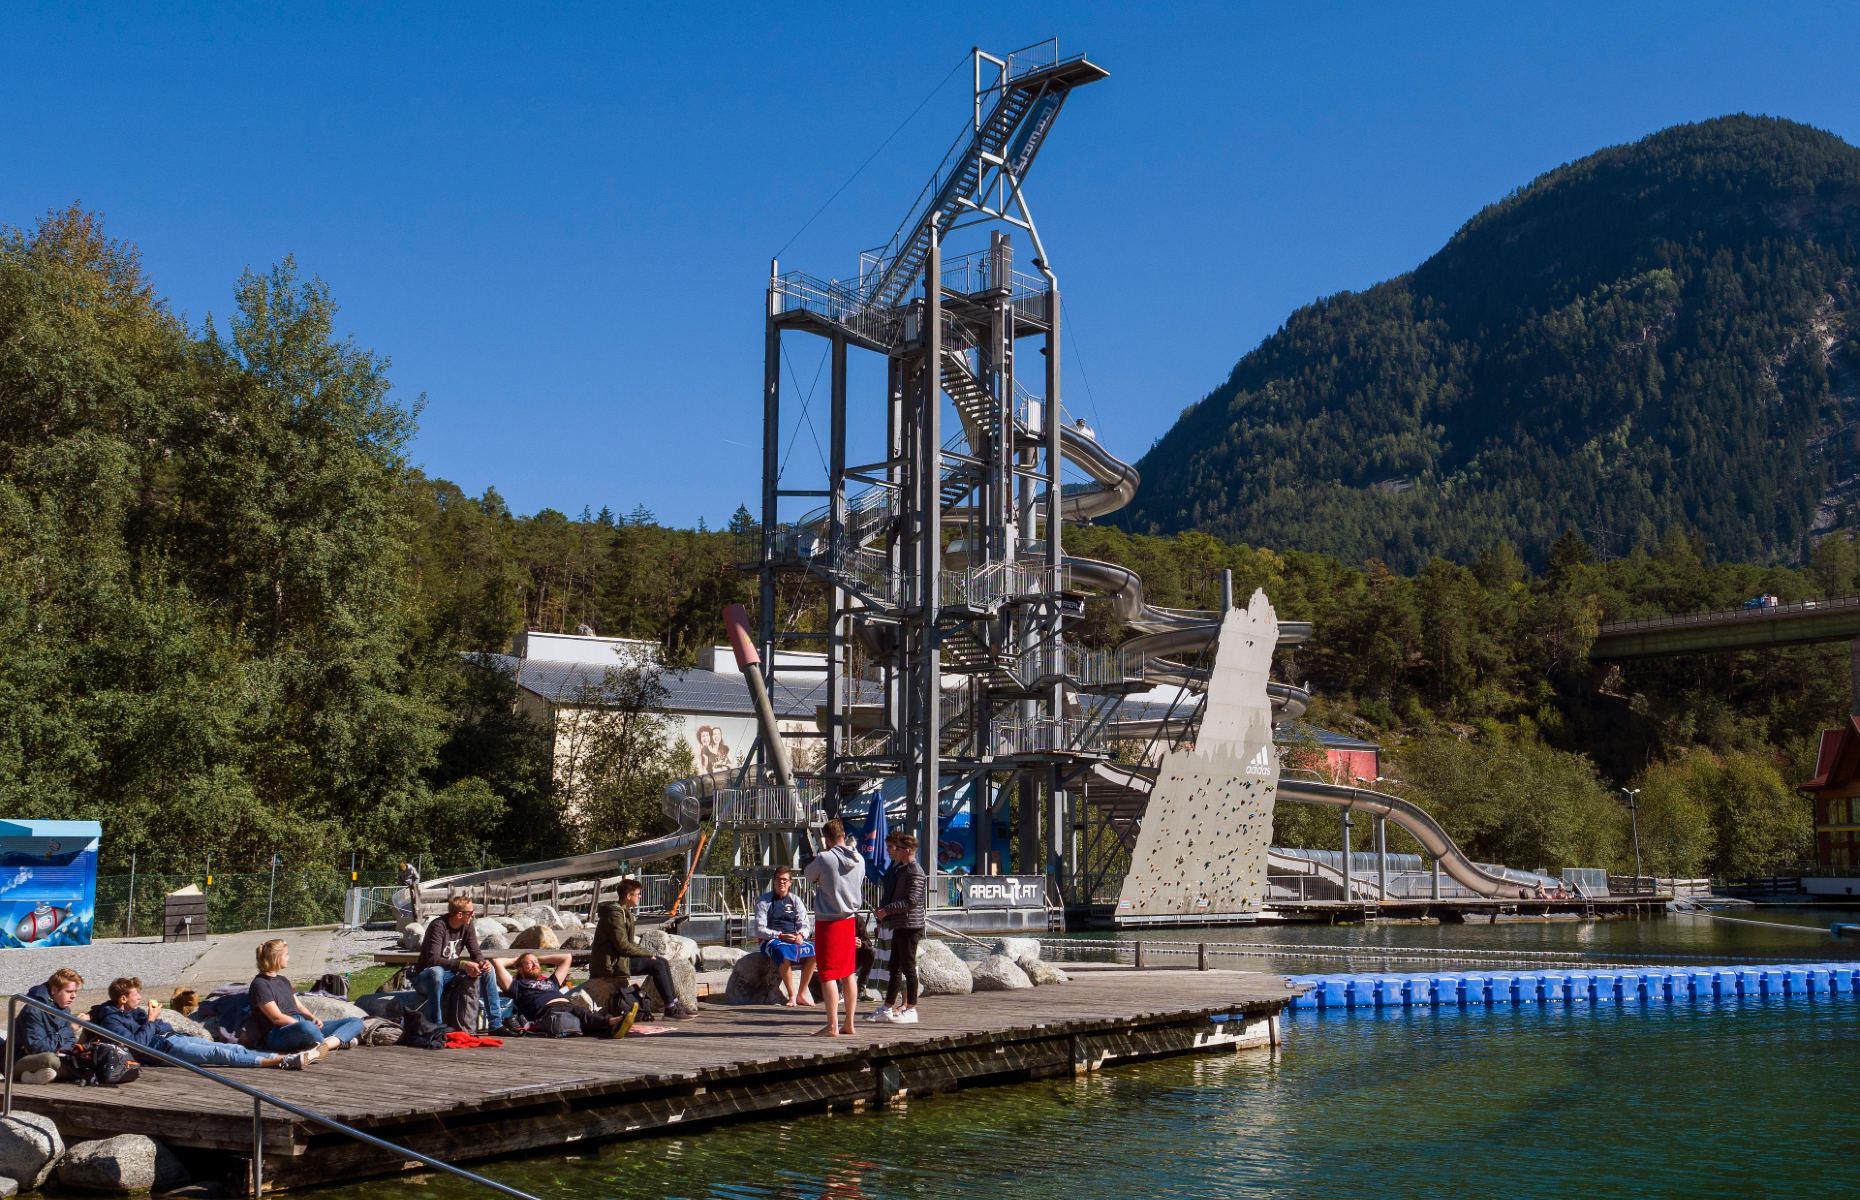 <p>This <a href="https://www.area47.at/en">excellent outdoor playground</a> in the Ötztal valley in the Tirol promises plenty of thrills and spills. Based around a lake, water-centric attractions include the Cannonball where you'll be blasted into the water from a seat with a huge water jet. You can also whiz down the slides, go 'cliff diving' from an incredibly high diving board or try your hand at 'blobbing' – basically throwing yourself onto an inflatable blob from a tower. </p>